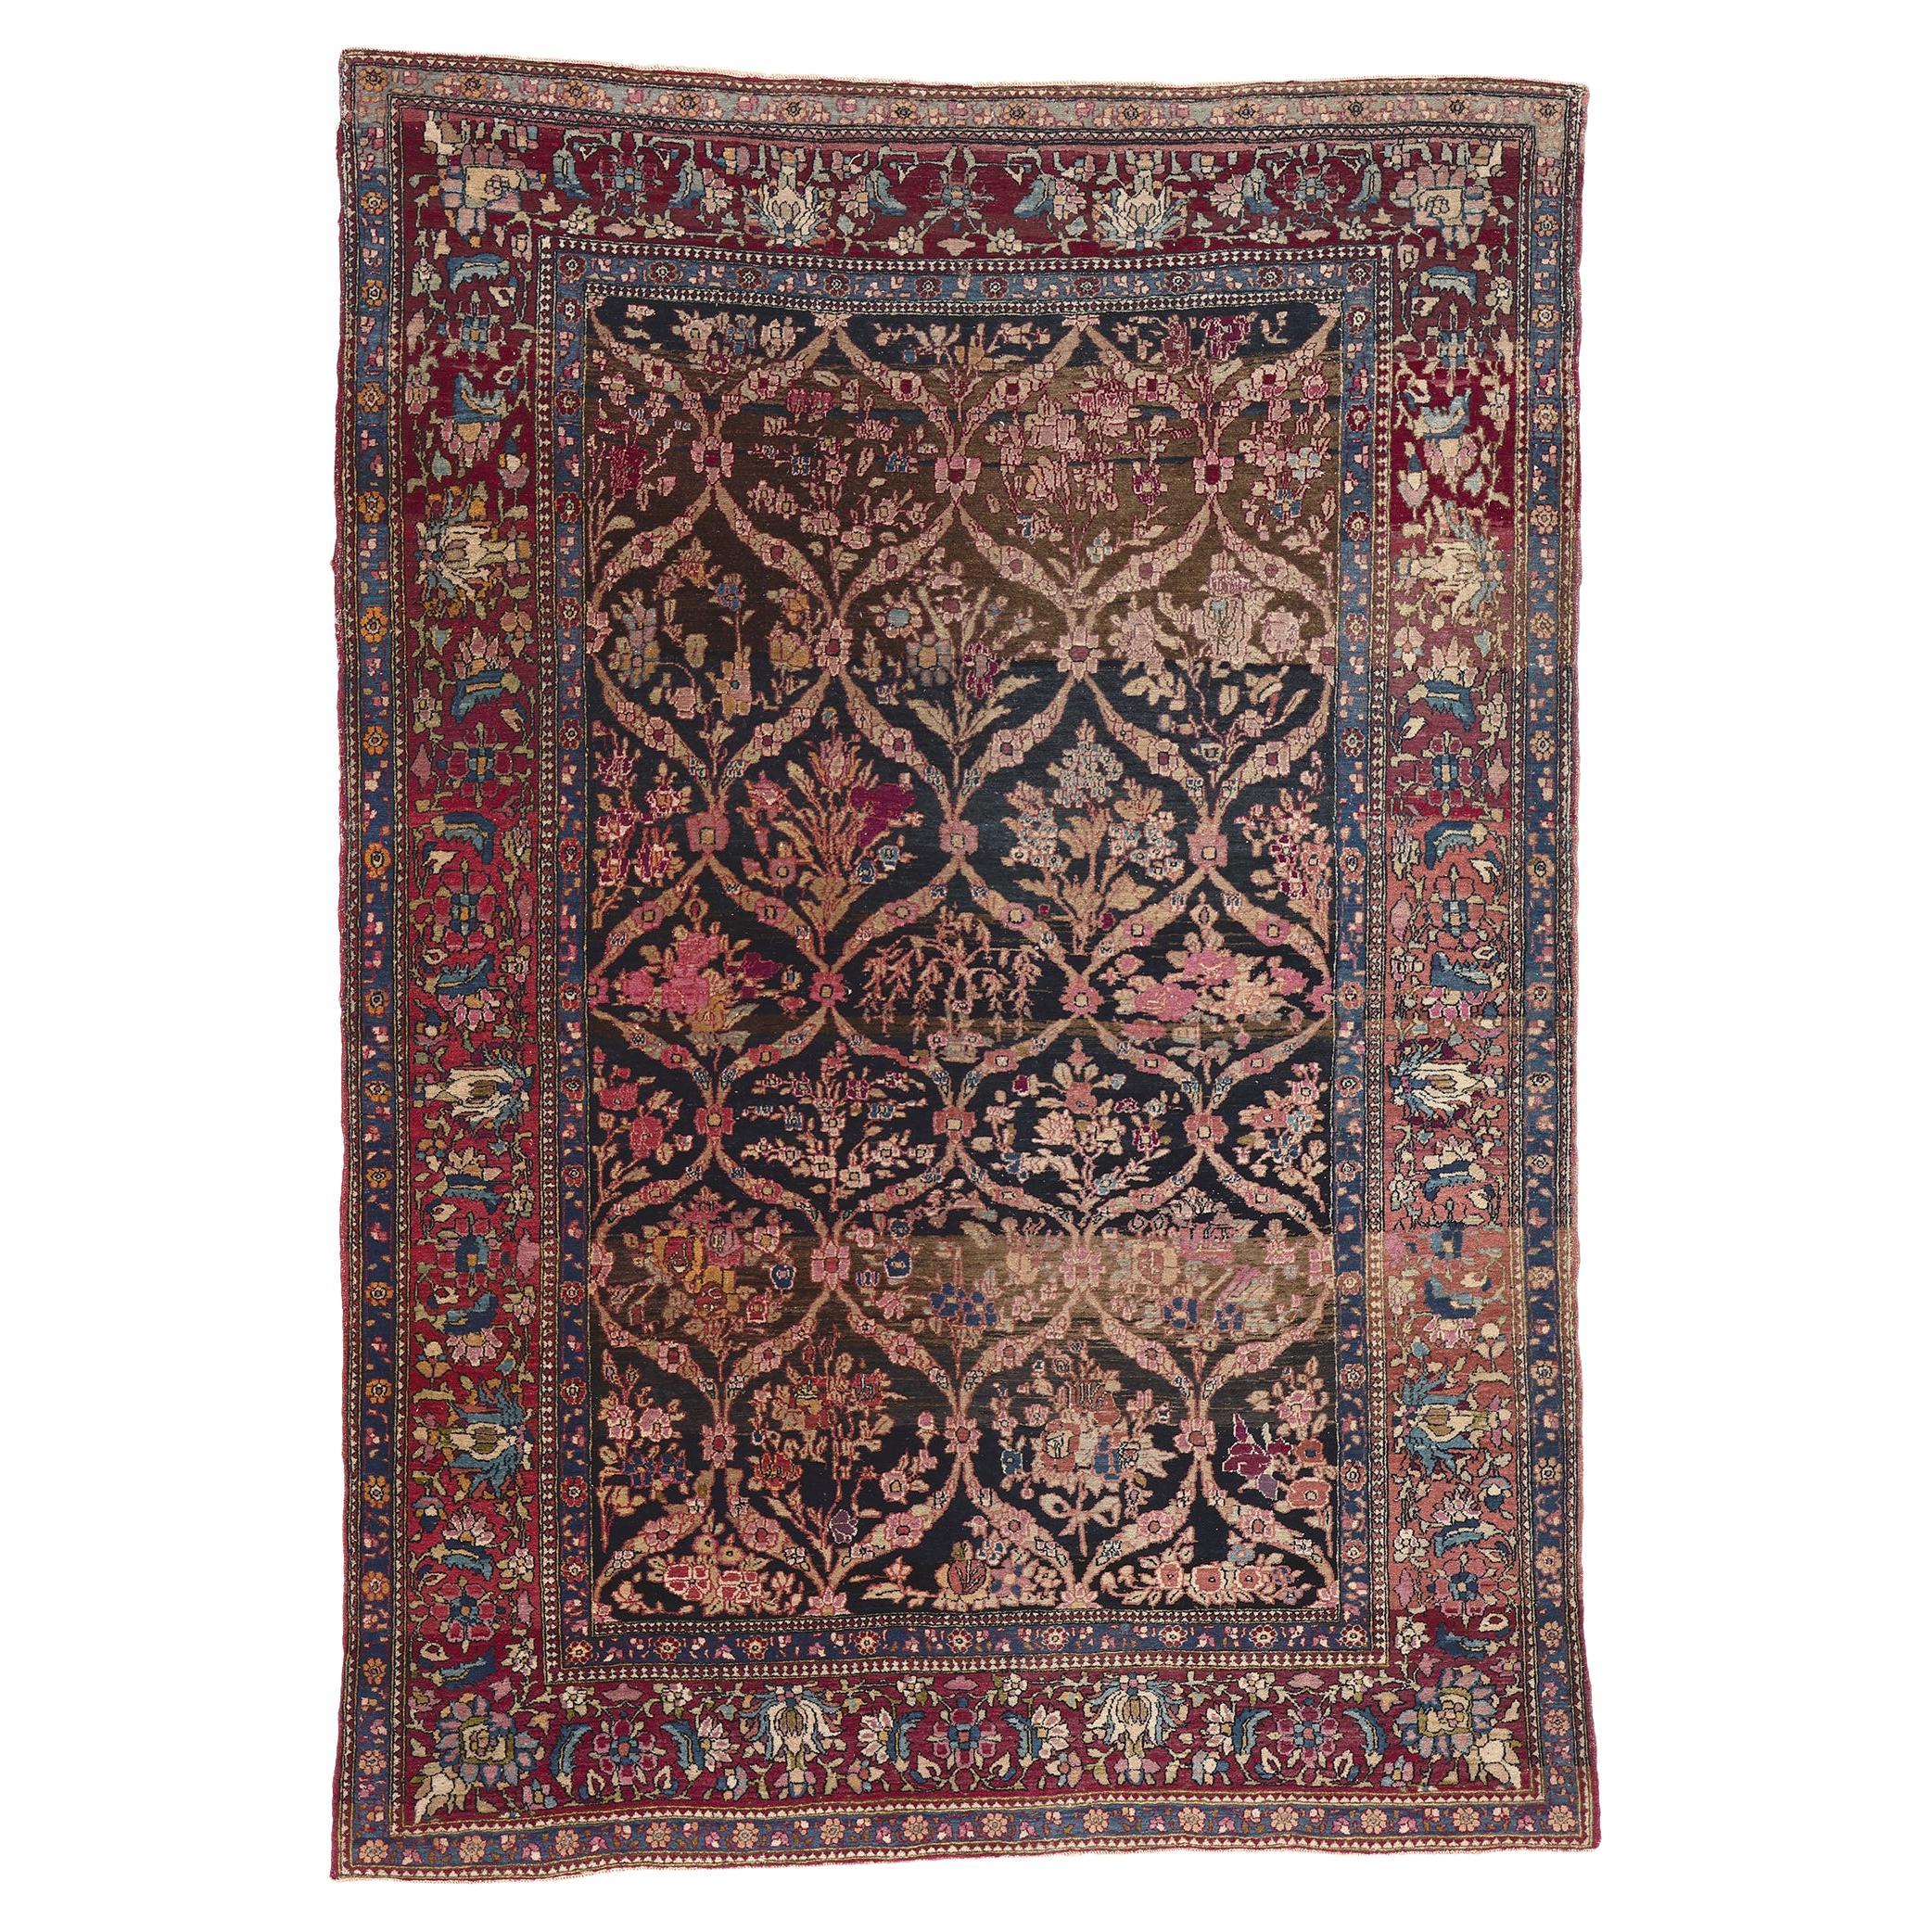 Antique Persian Isfahan Rug, Stately Decadence Meets Old World Charm